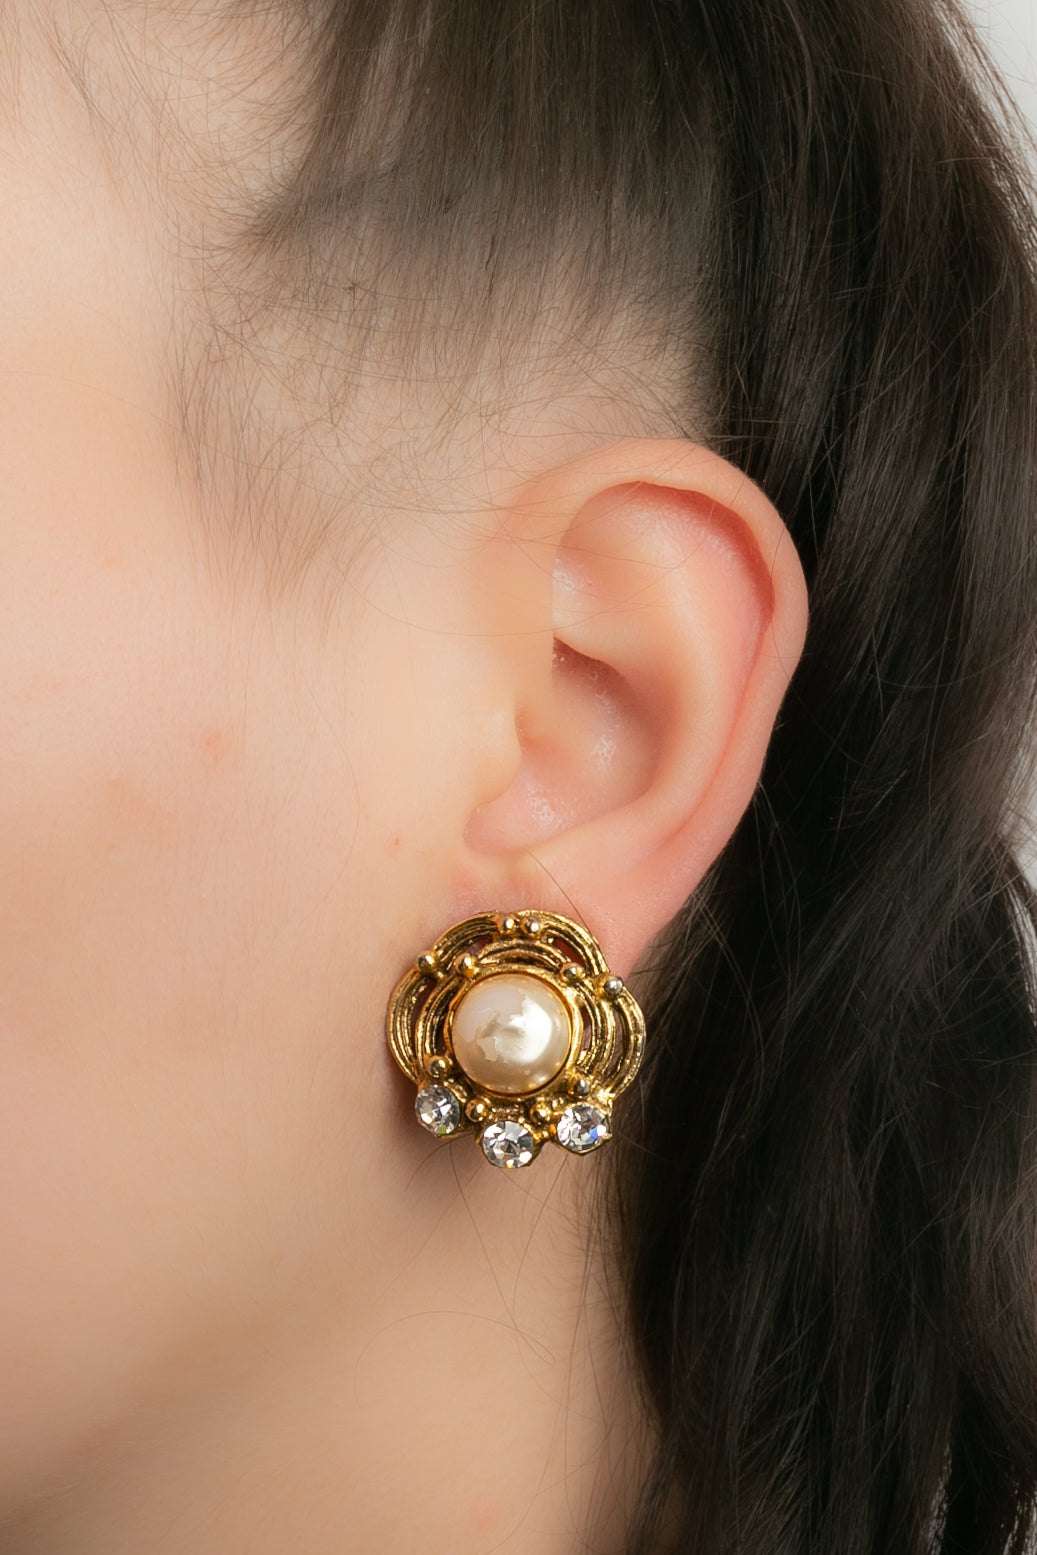 Discover 145+ chanel baroque earrings 